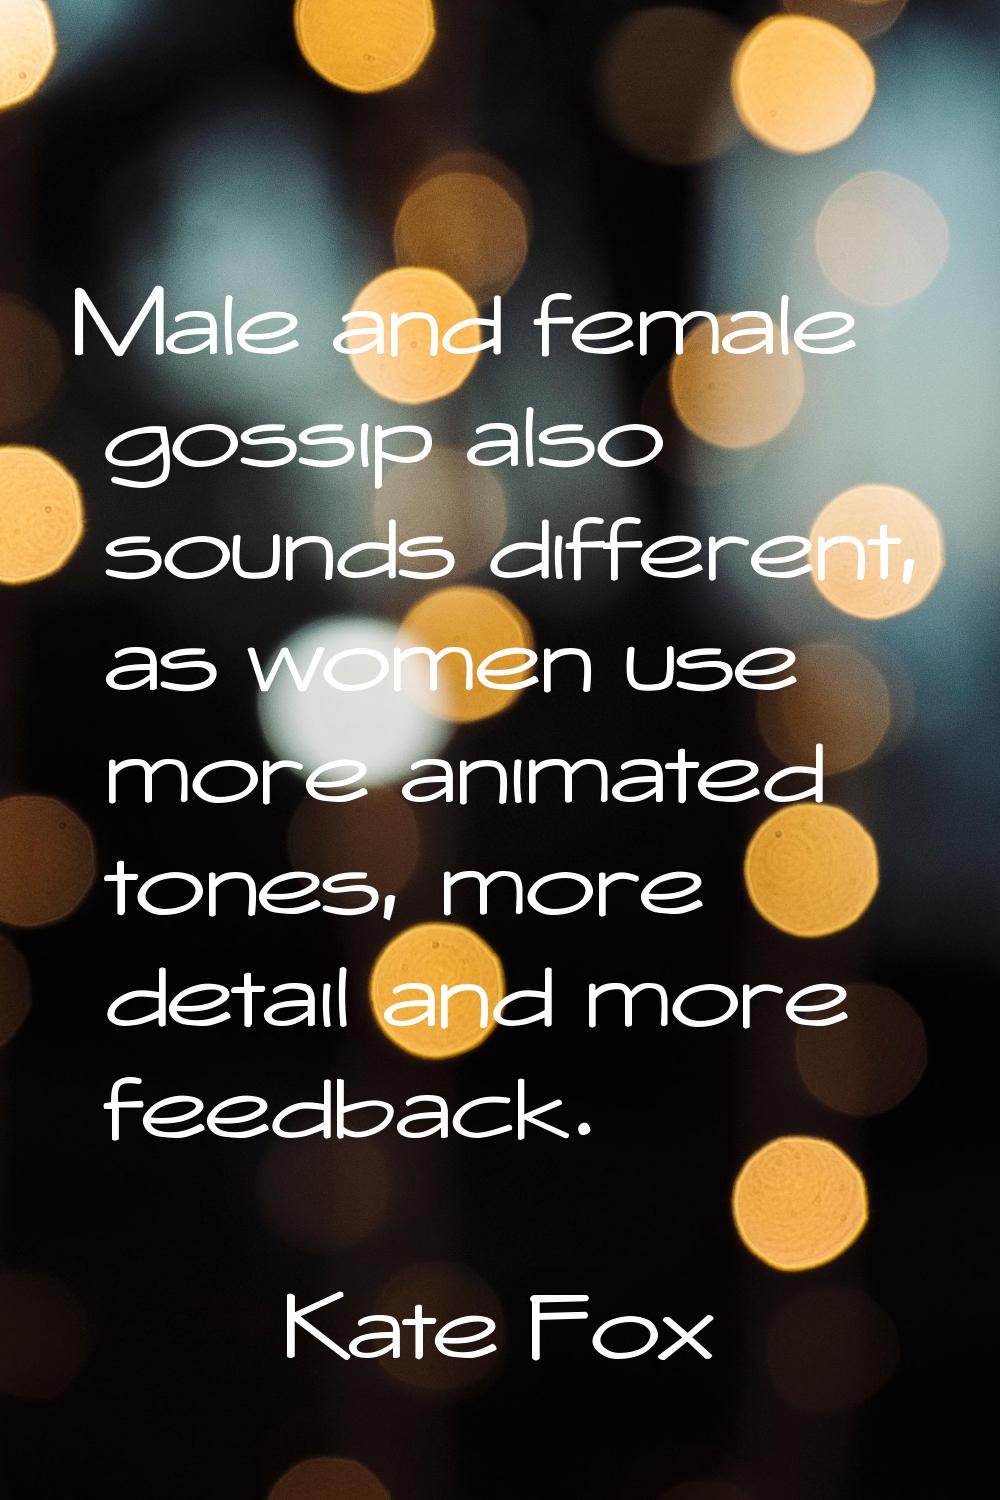 Male and female gossip also sounds different, as women use more animated tones, more detail and mor